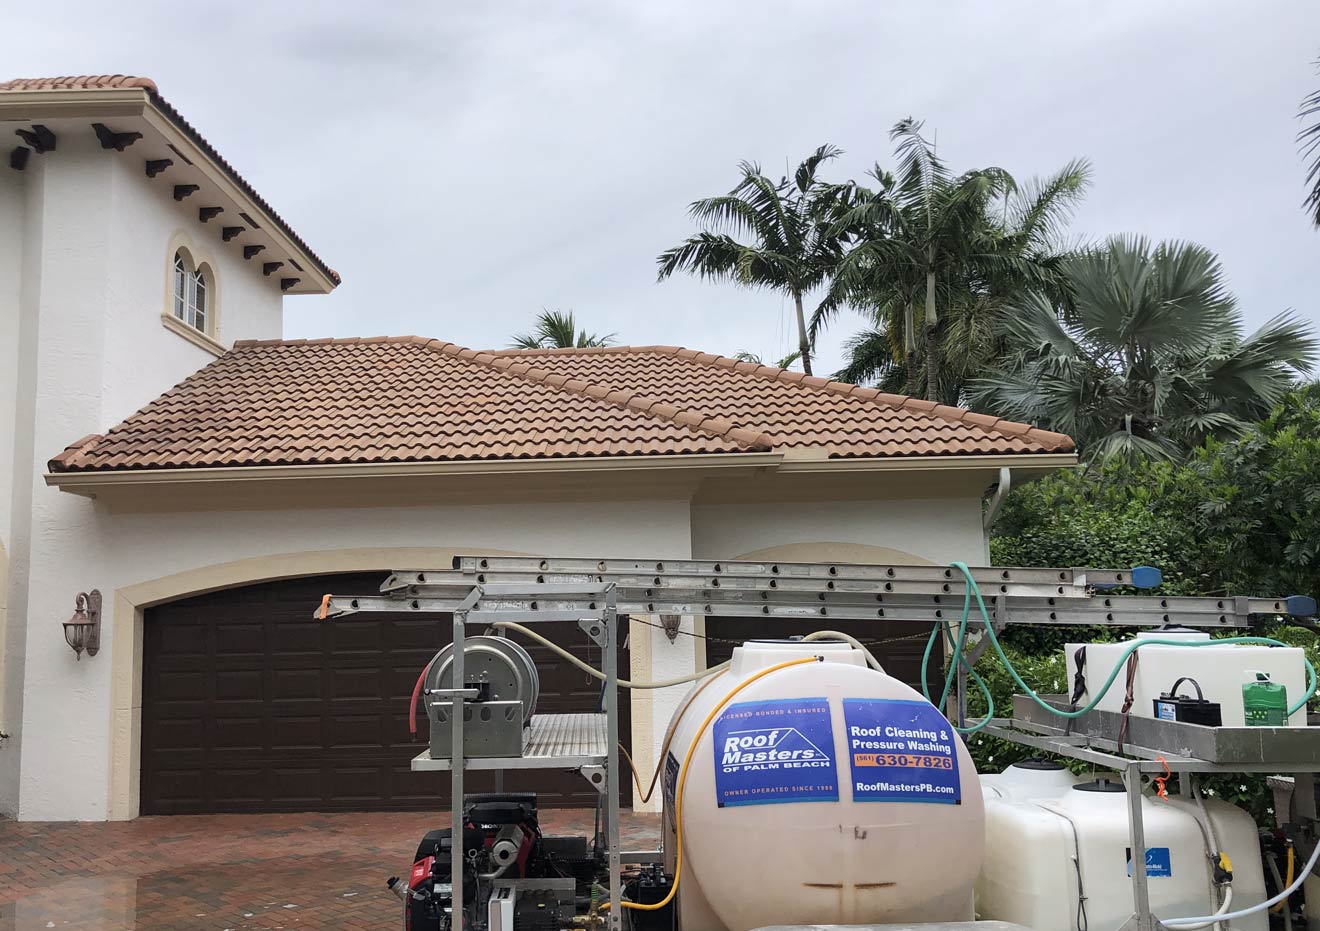 Tile Pressure Cleaning Gulfstream Florida